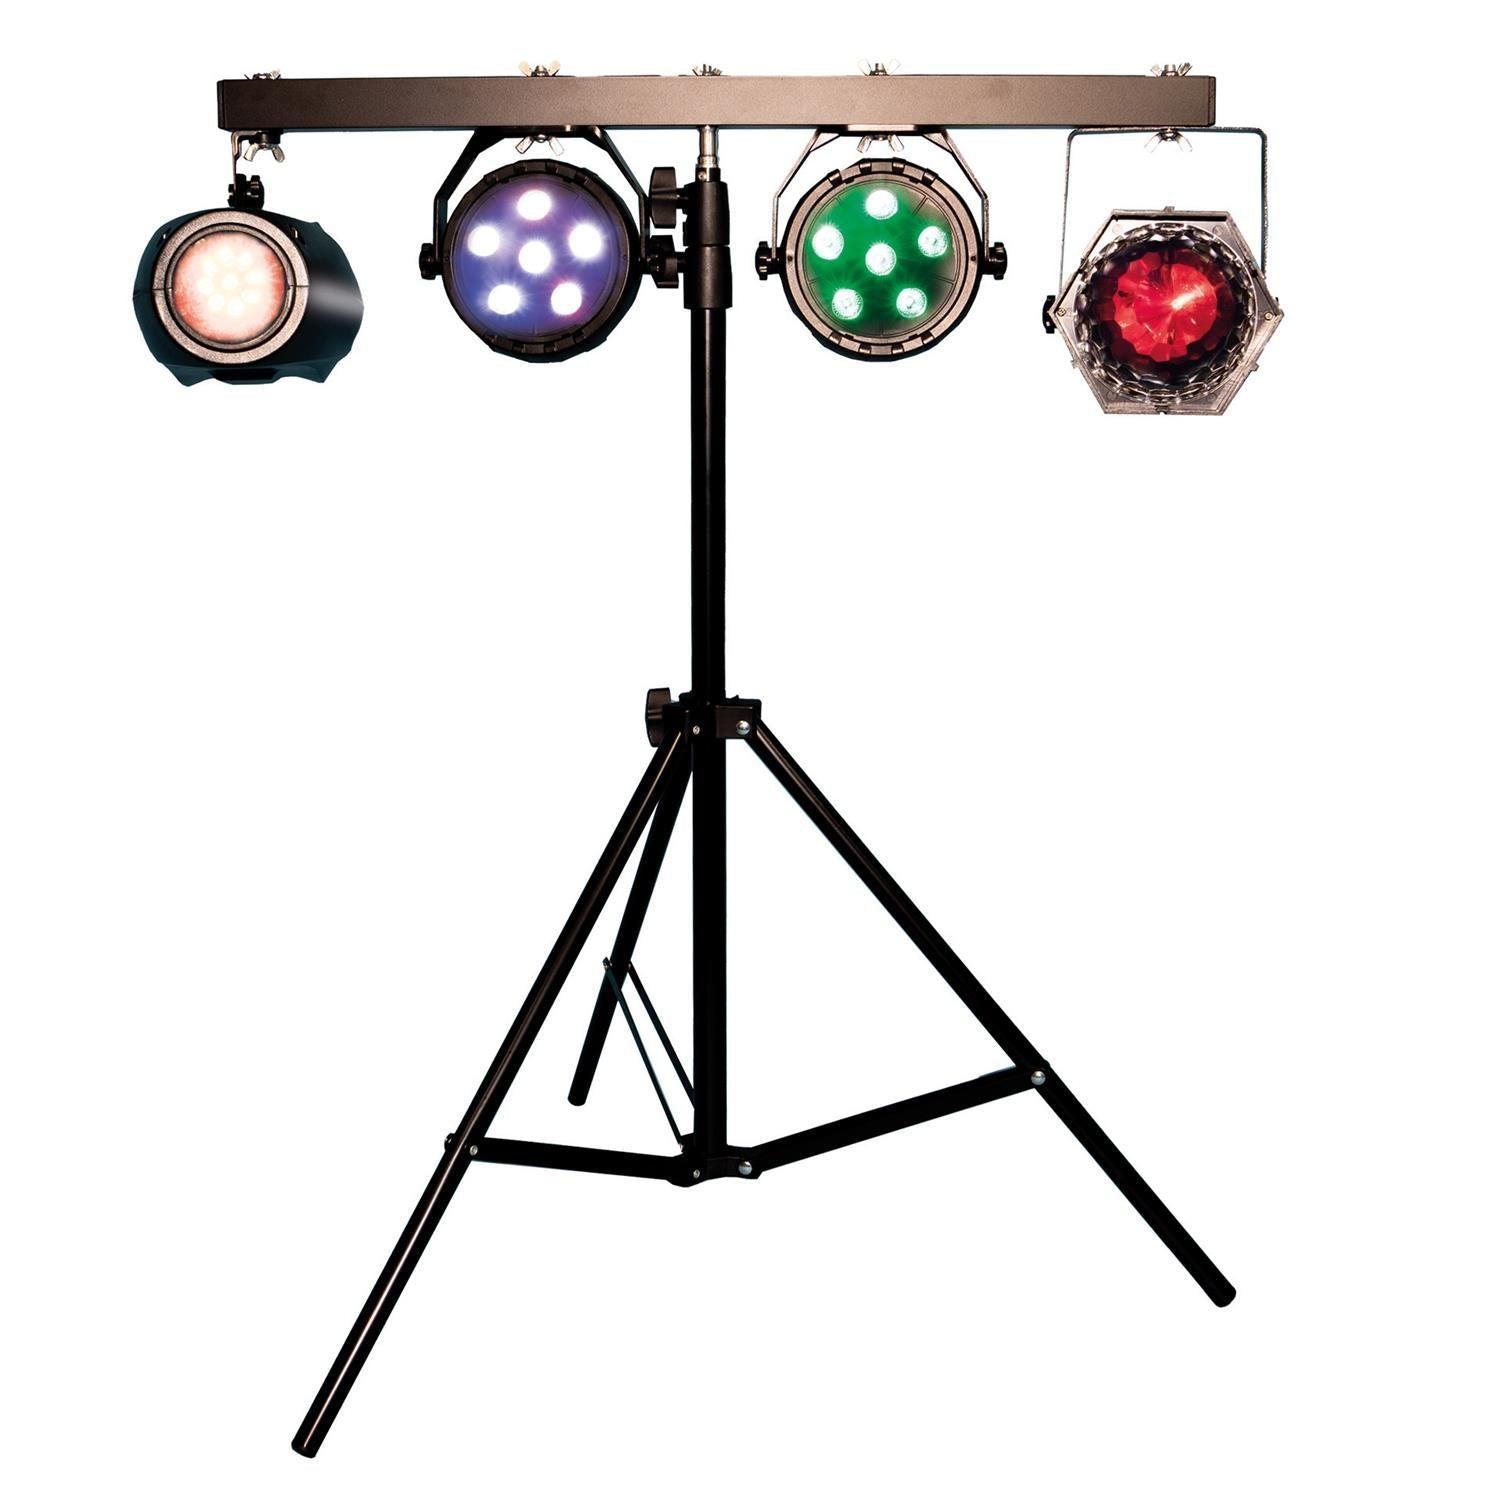 FXLAB Mobile DJ Lighting Kit with 4 LED Lighting Effects - DY Pro Audio